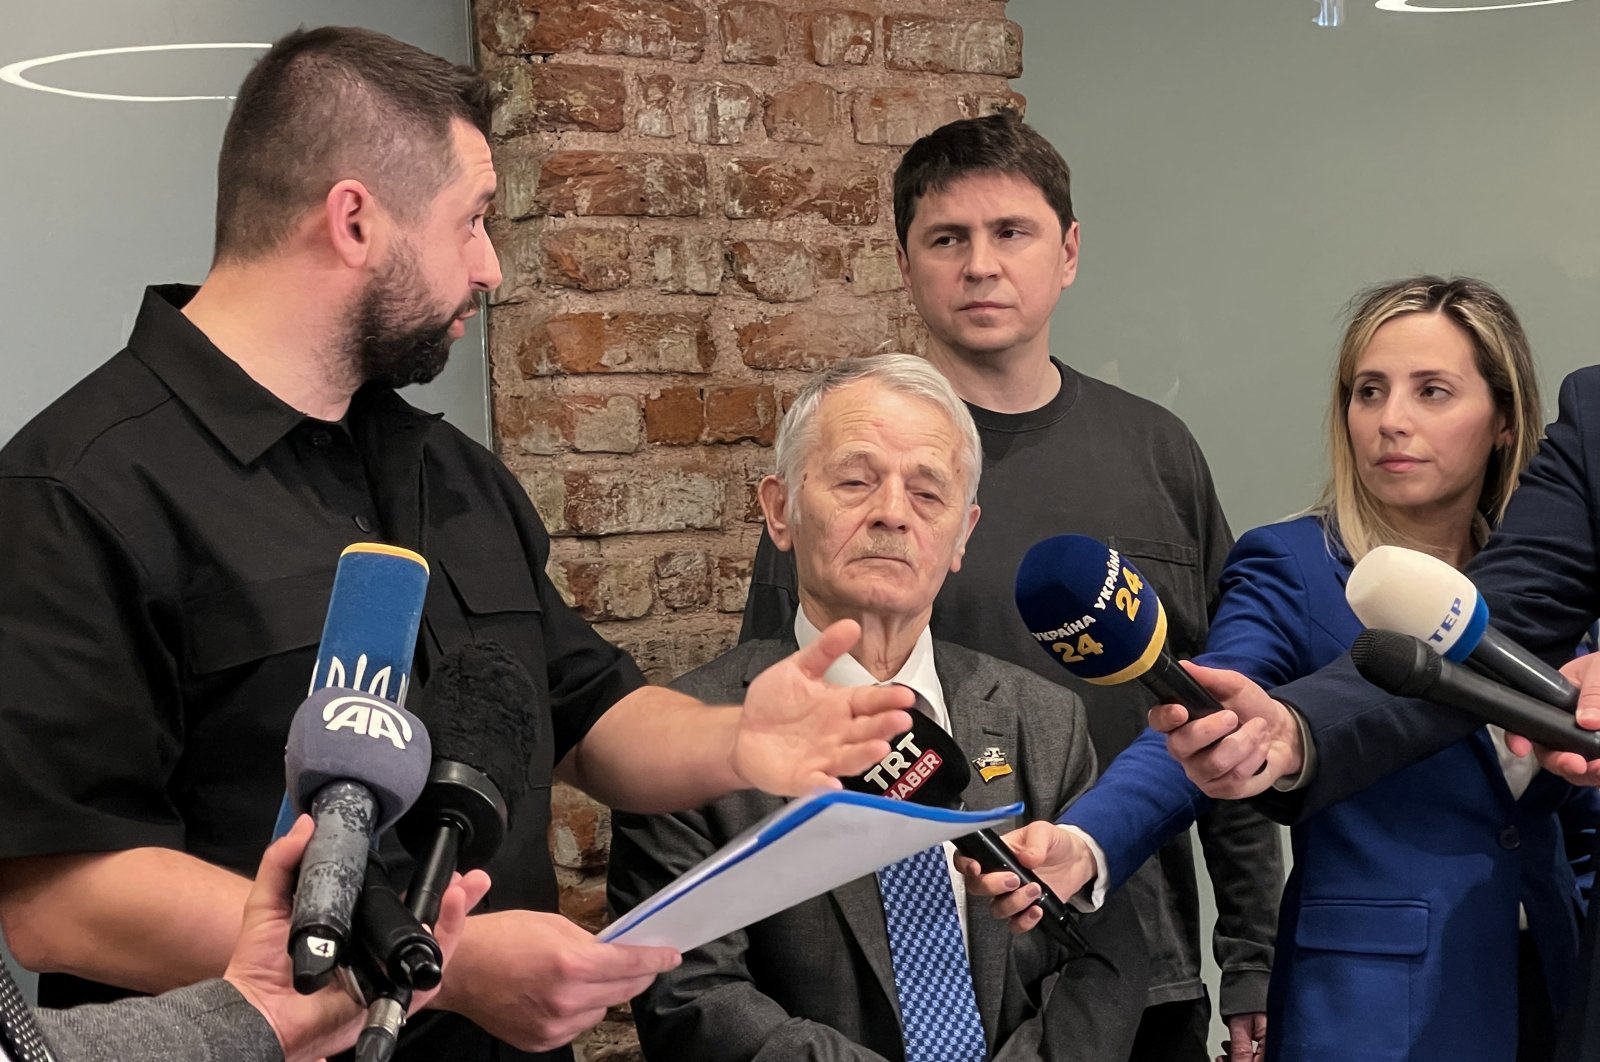 Members of the Ukrainian delegation, David Arakhamia, head of the Servant of the People faction, Mykhailo Podolyak, a political adviser to President Volodymyr Zelenskyy, and Crimean Tatar leader Mustafa Dzhemilev talk to media after their meeting with Russian negotiators in Istanbul, Turkey, March 29, 2022. (Reuters File Photo)